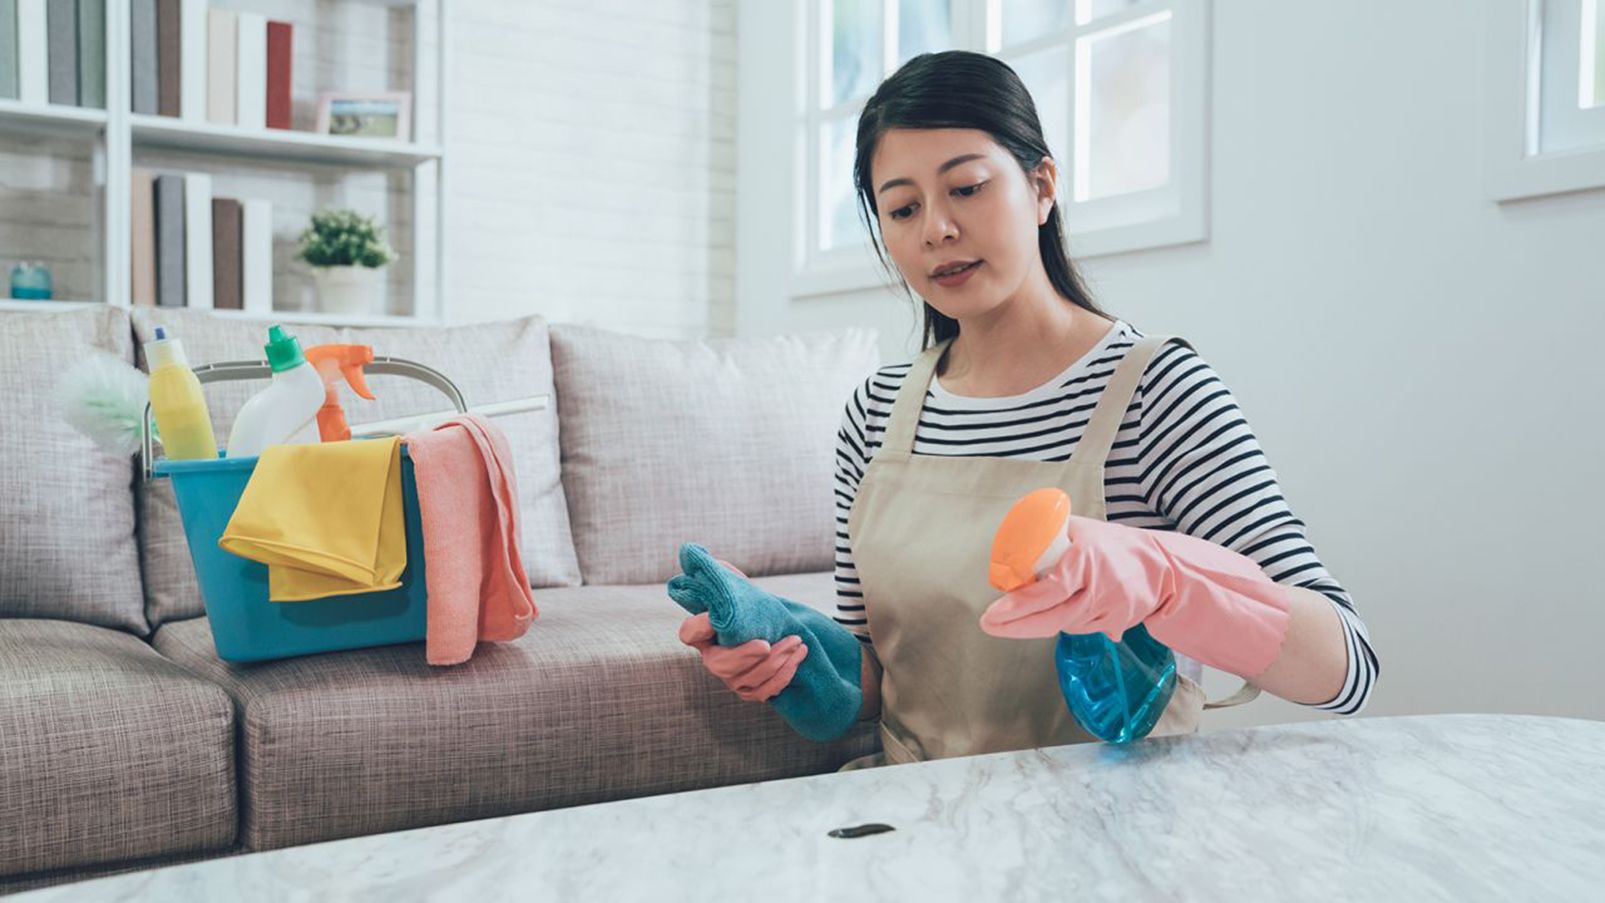 Best Non-Toxic Cleaning Brands and Products - Live Simply